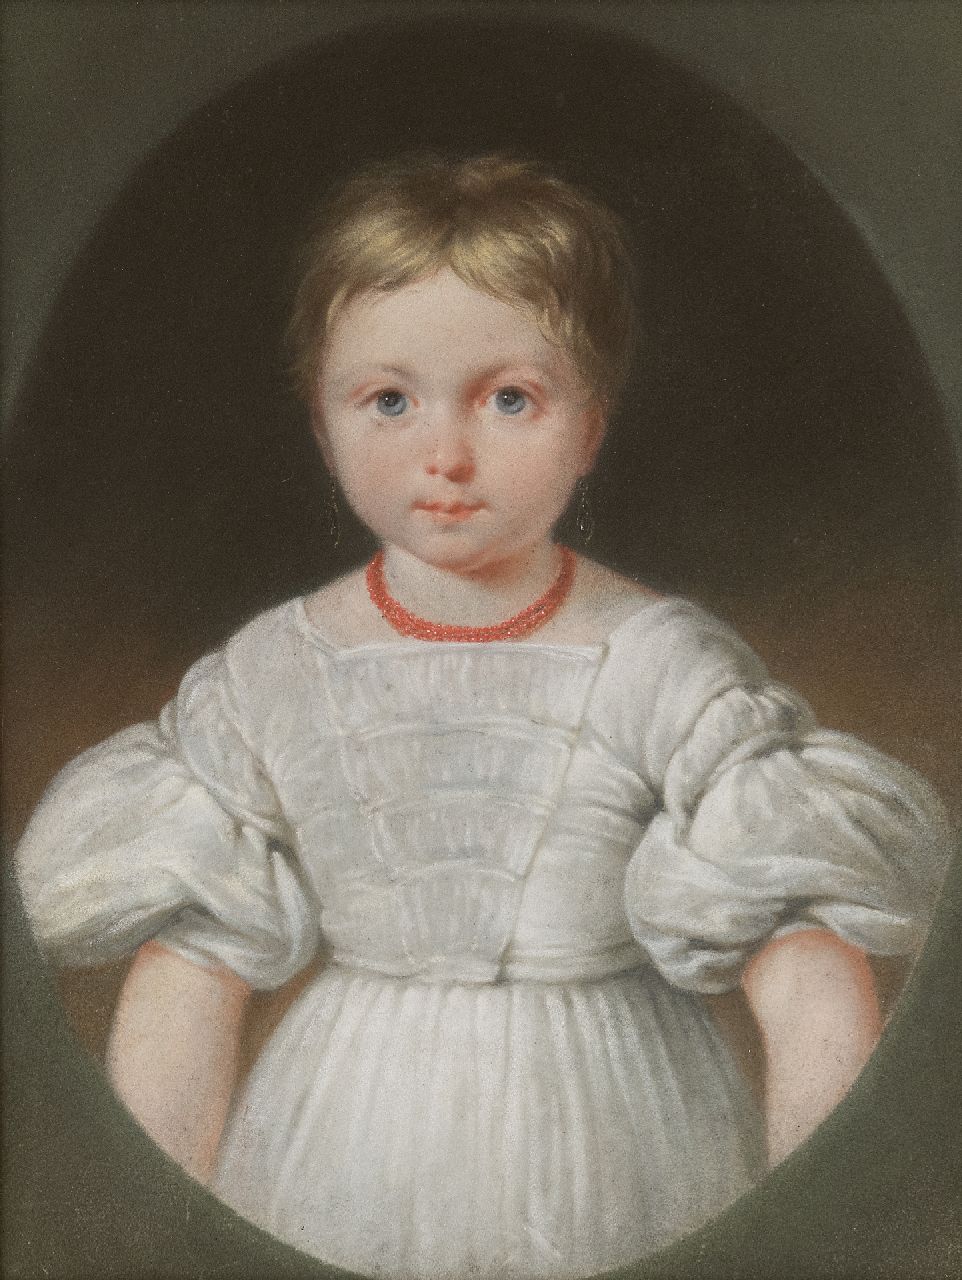 Daiwaille J.A.  | Jean Augustin Daiwaille | Watercolours and drawings offered for sale | Portrait of a girl in a white dress, presumably  Henriette Louise Engelman (1 from 4 portraits), pastel on paper 31.5 x 24.3 cm